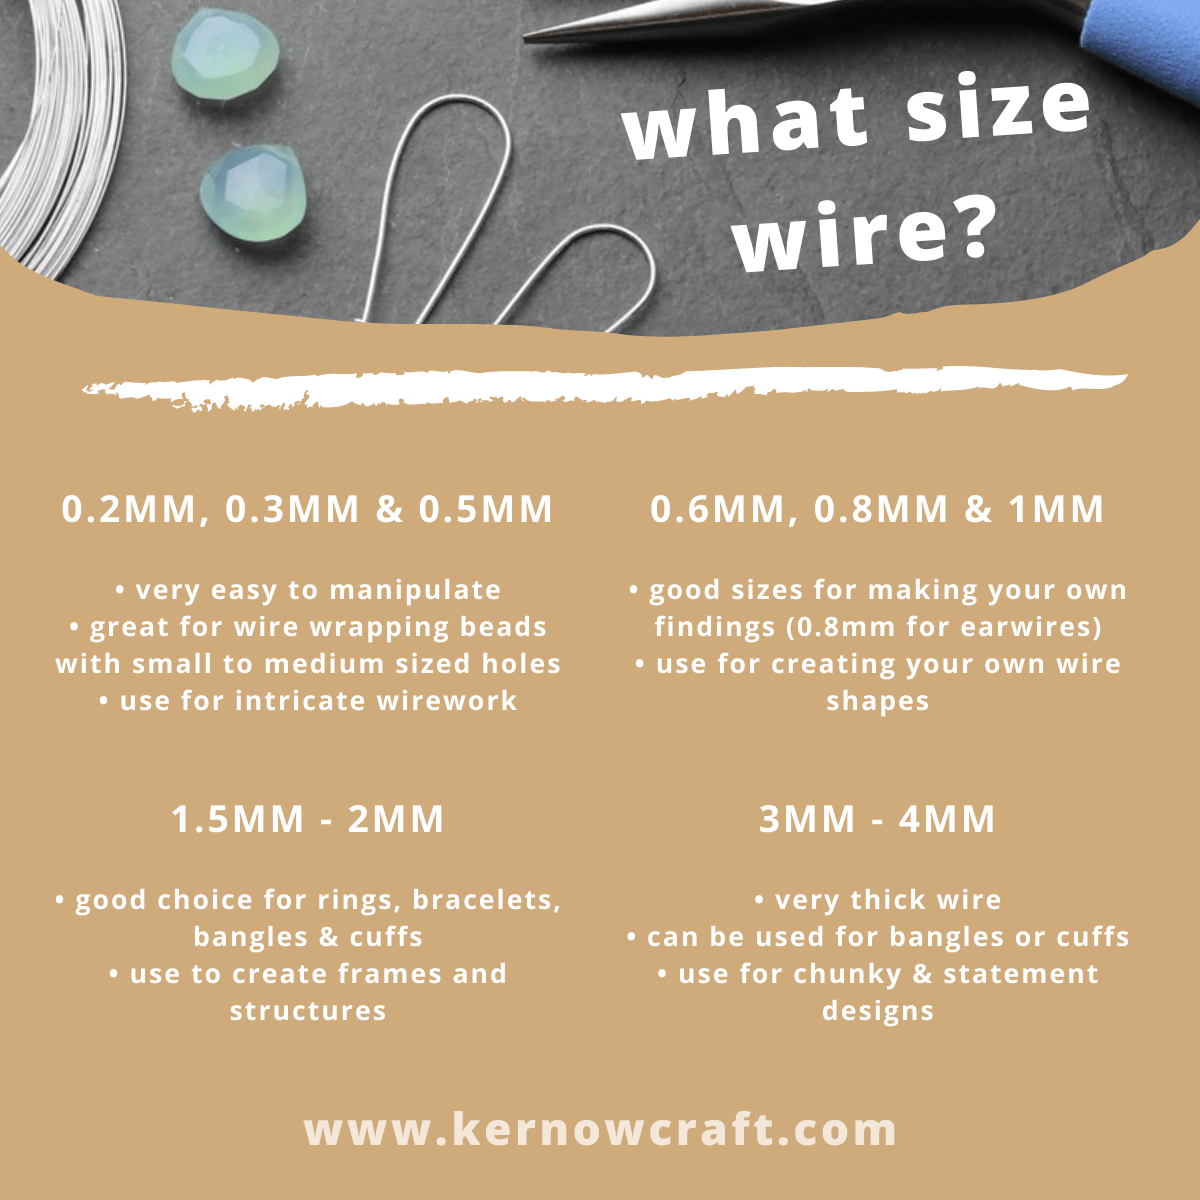 Compare Jewellery Designs Using Different Sized Wire